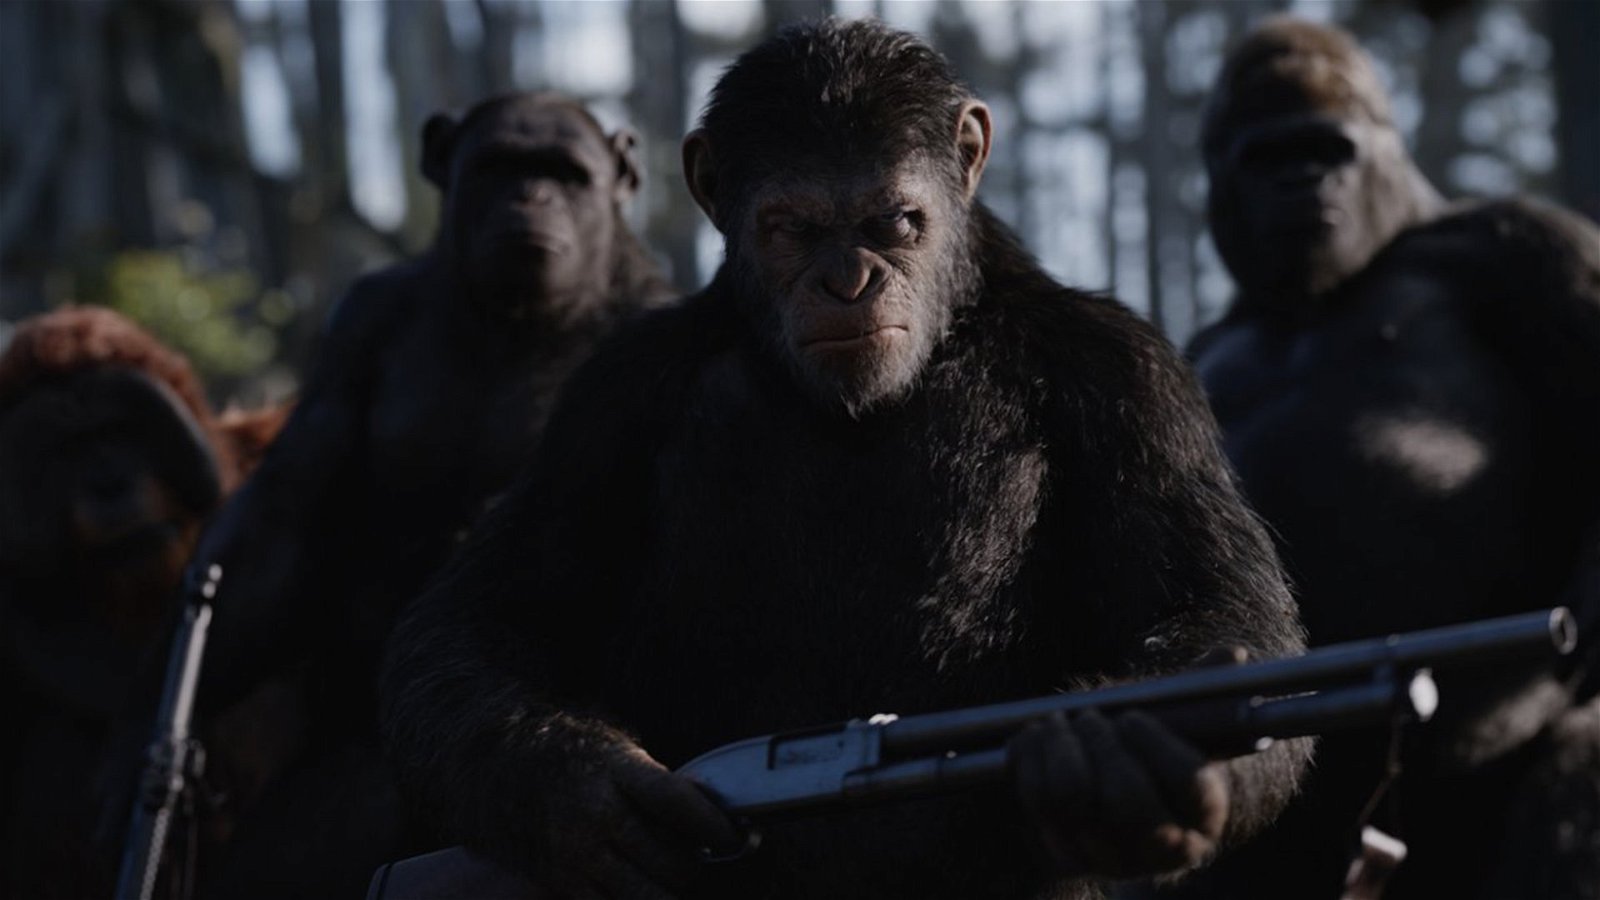 war for the planet of the apes full movie online